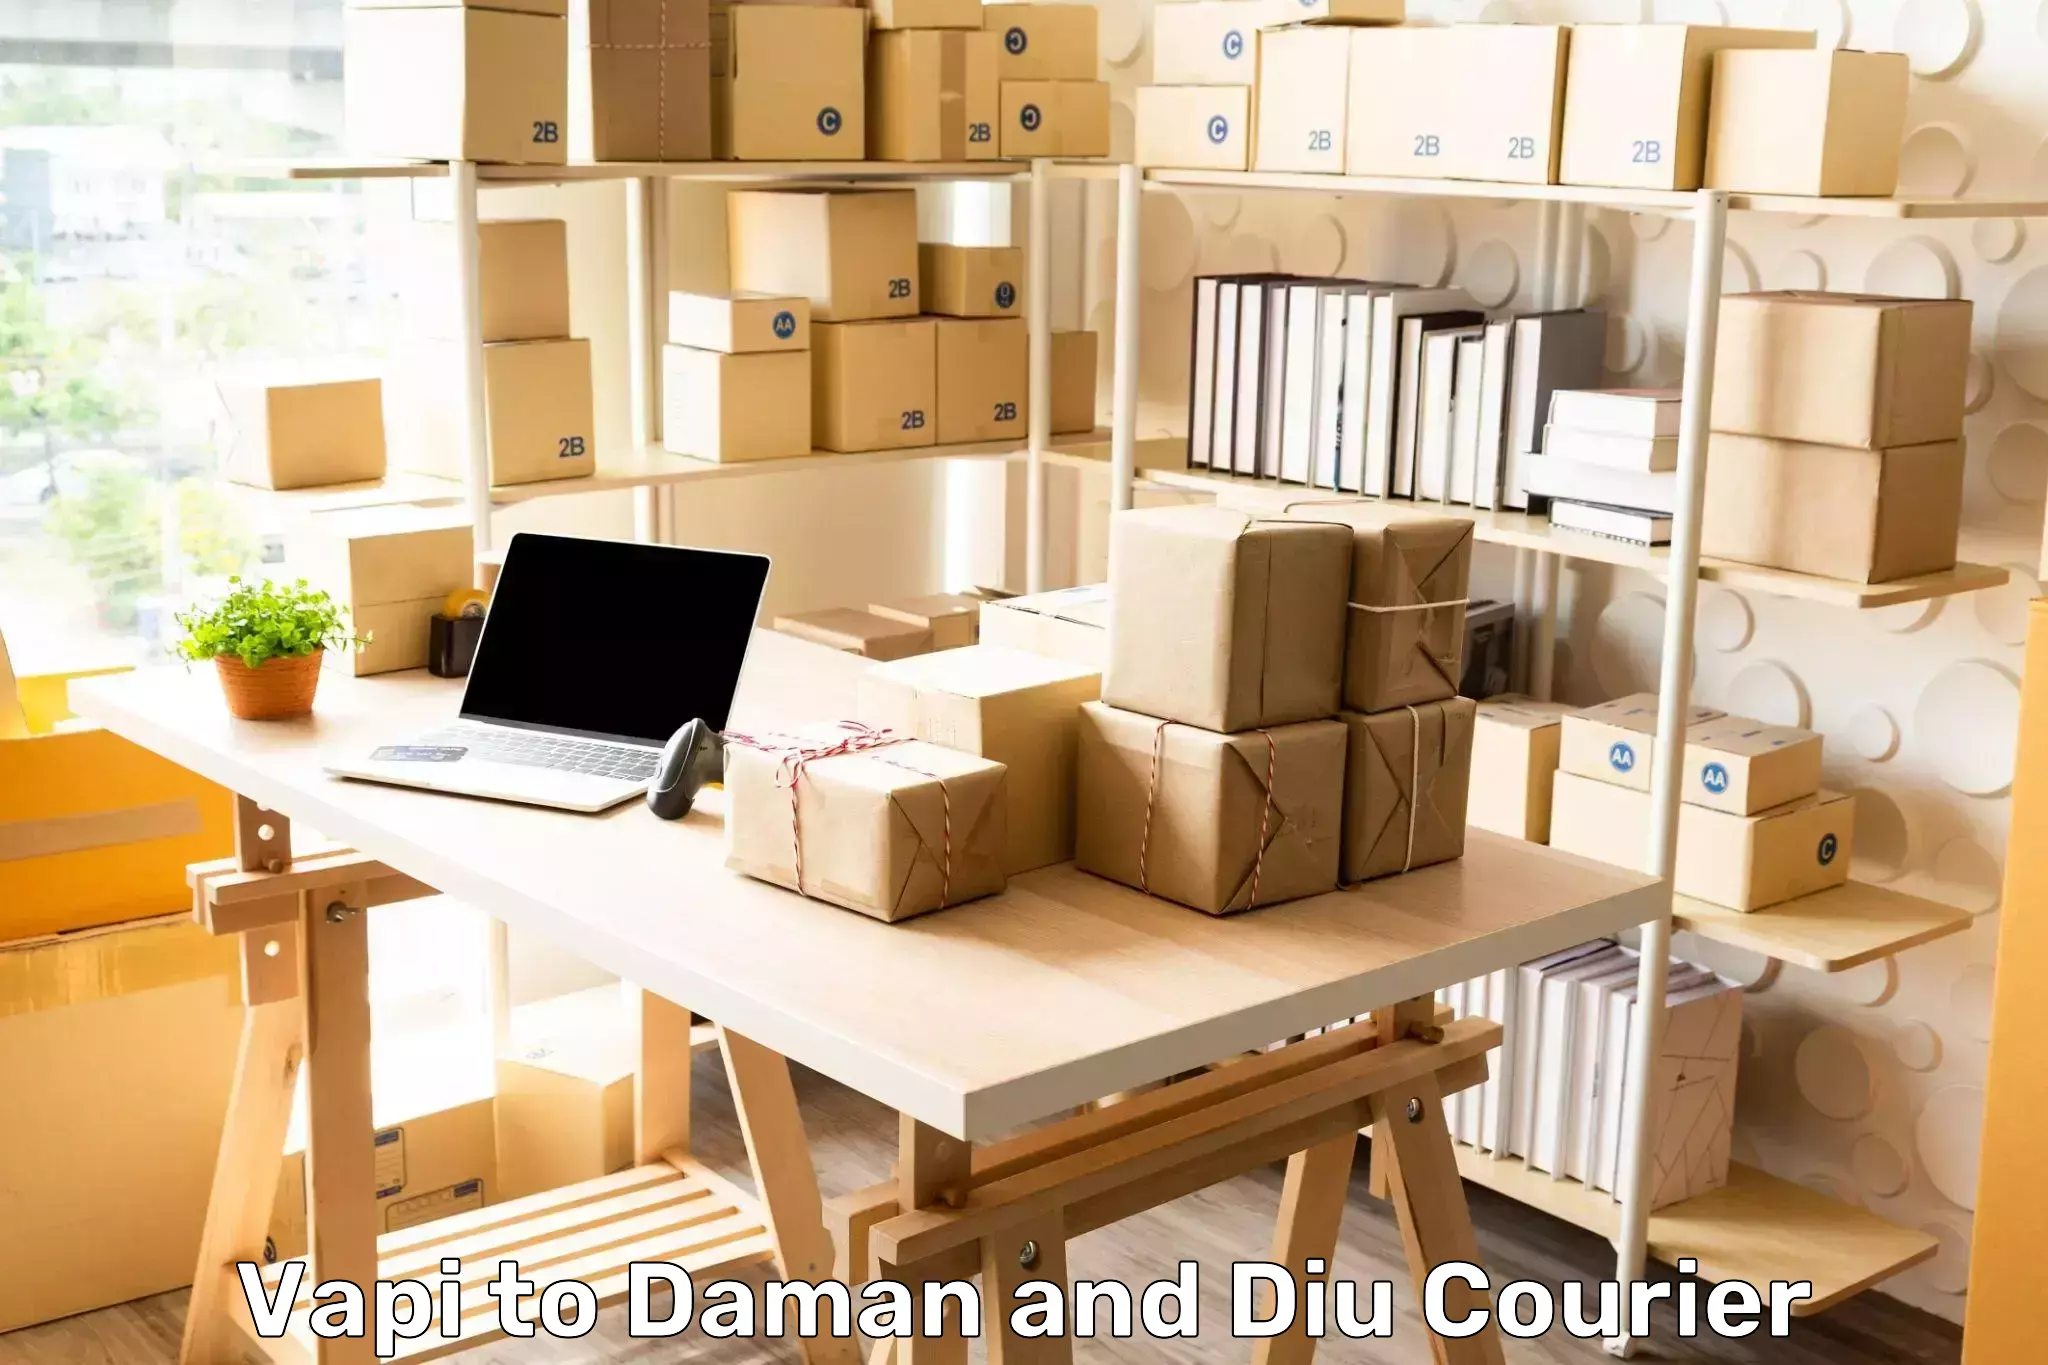 Multi-national courier services Vapi to Diu